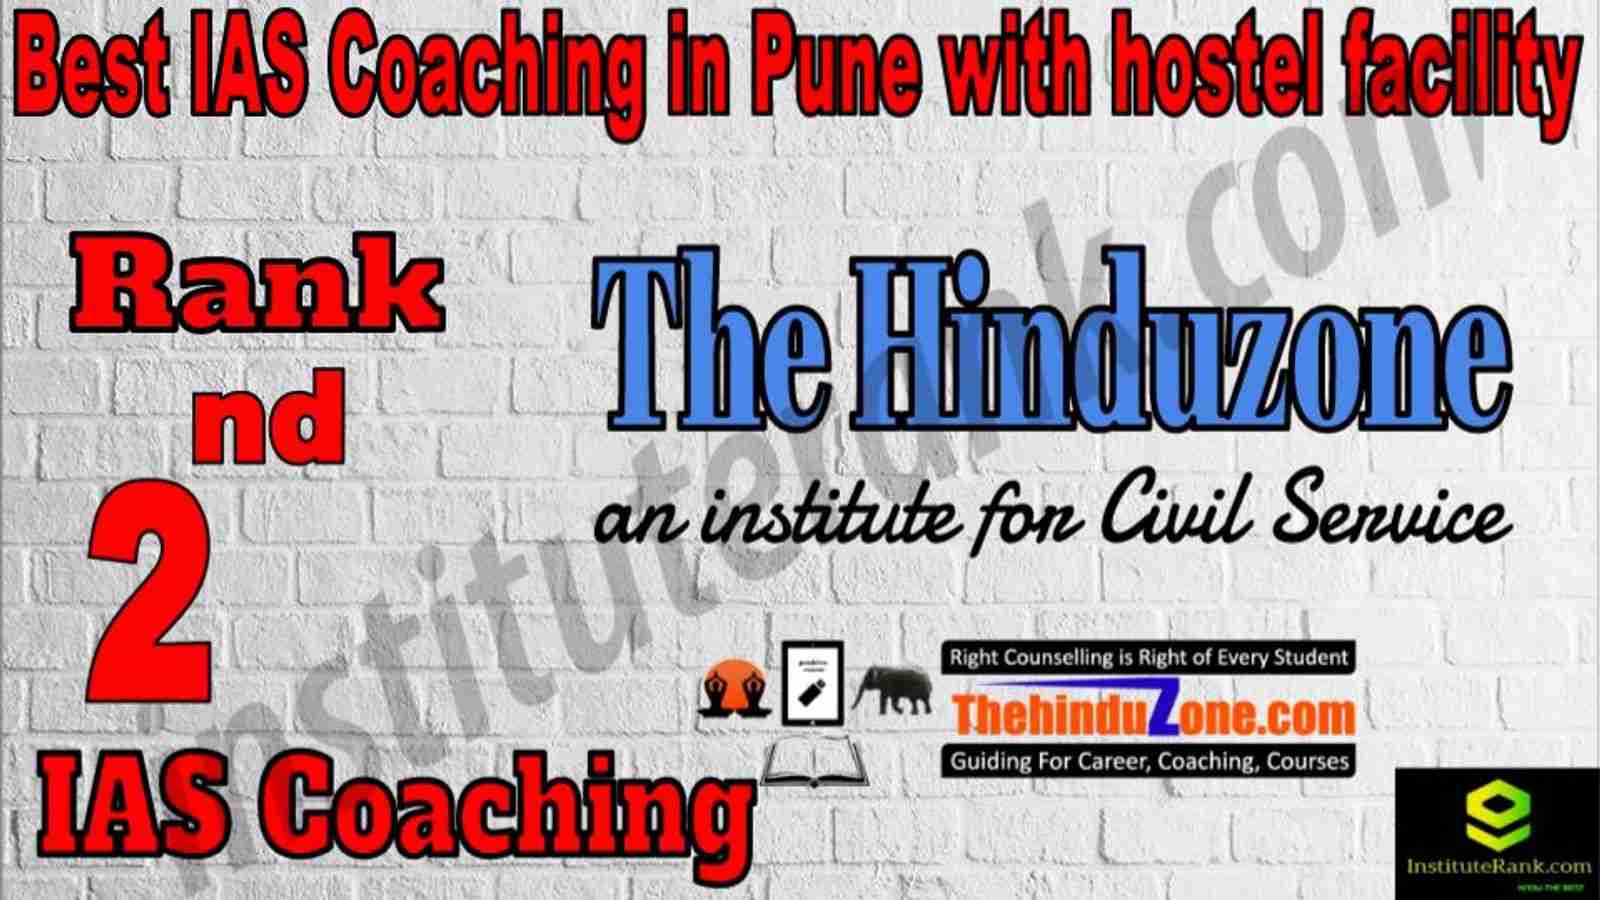 2nd Best IAS Coaching in Pune with hostel facility